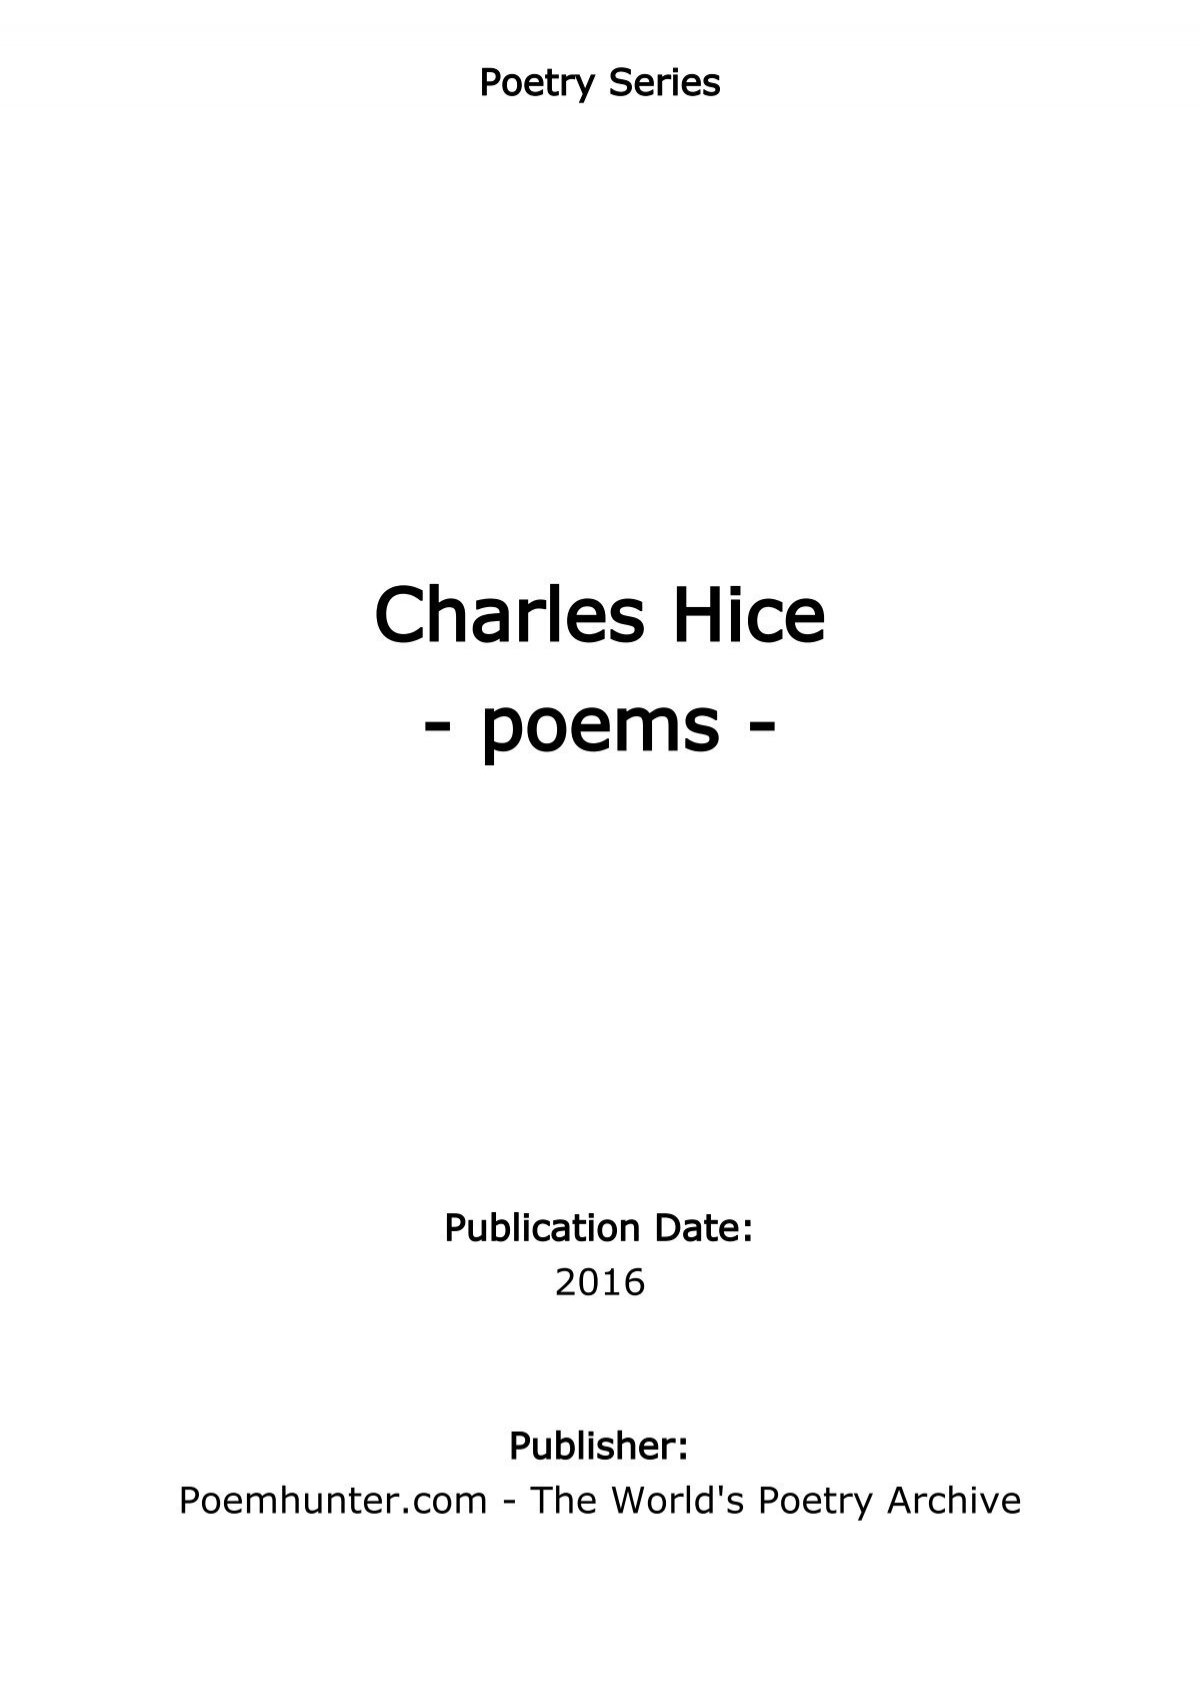 Charles Hice - poems 